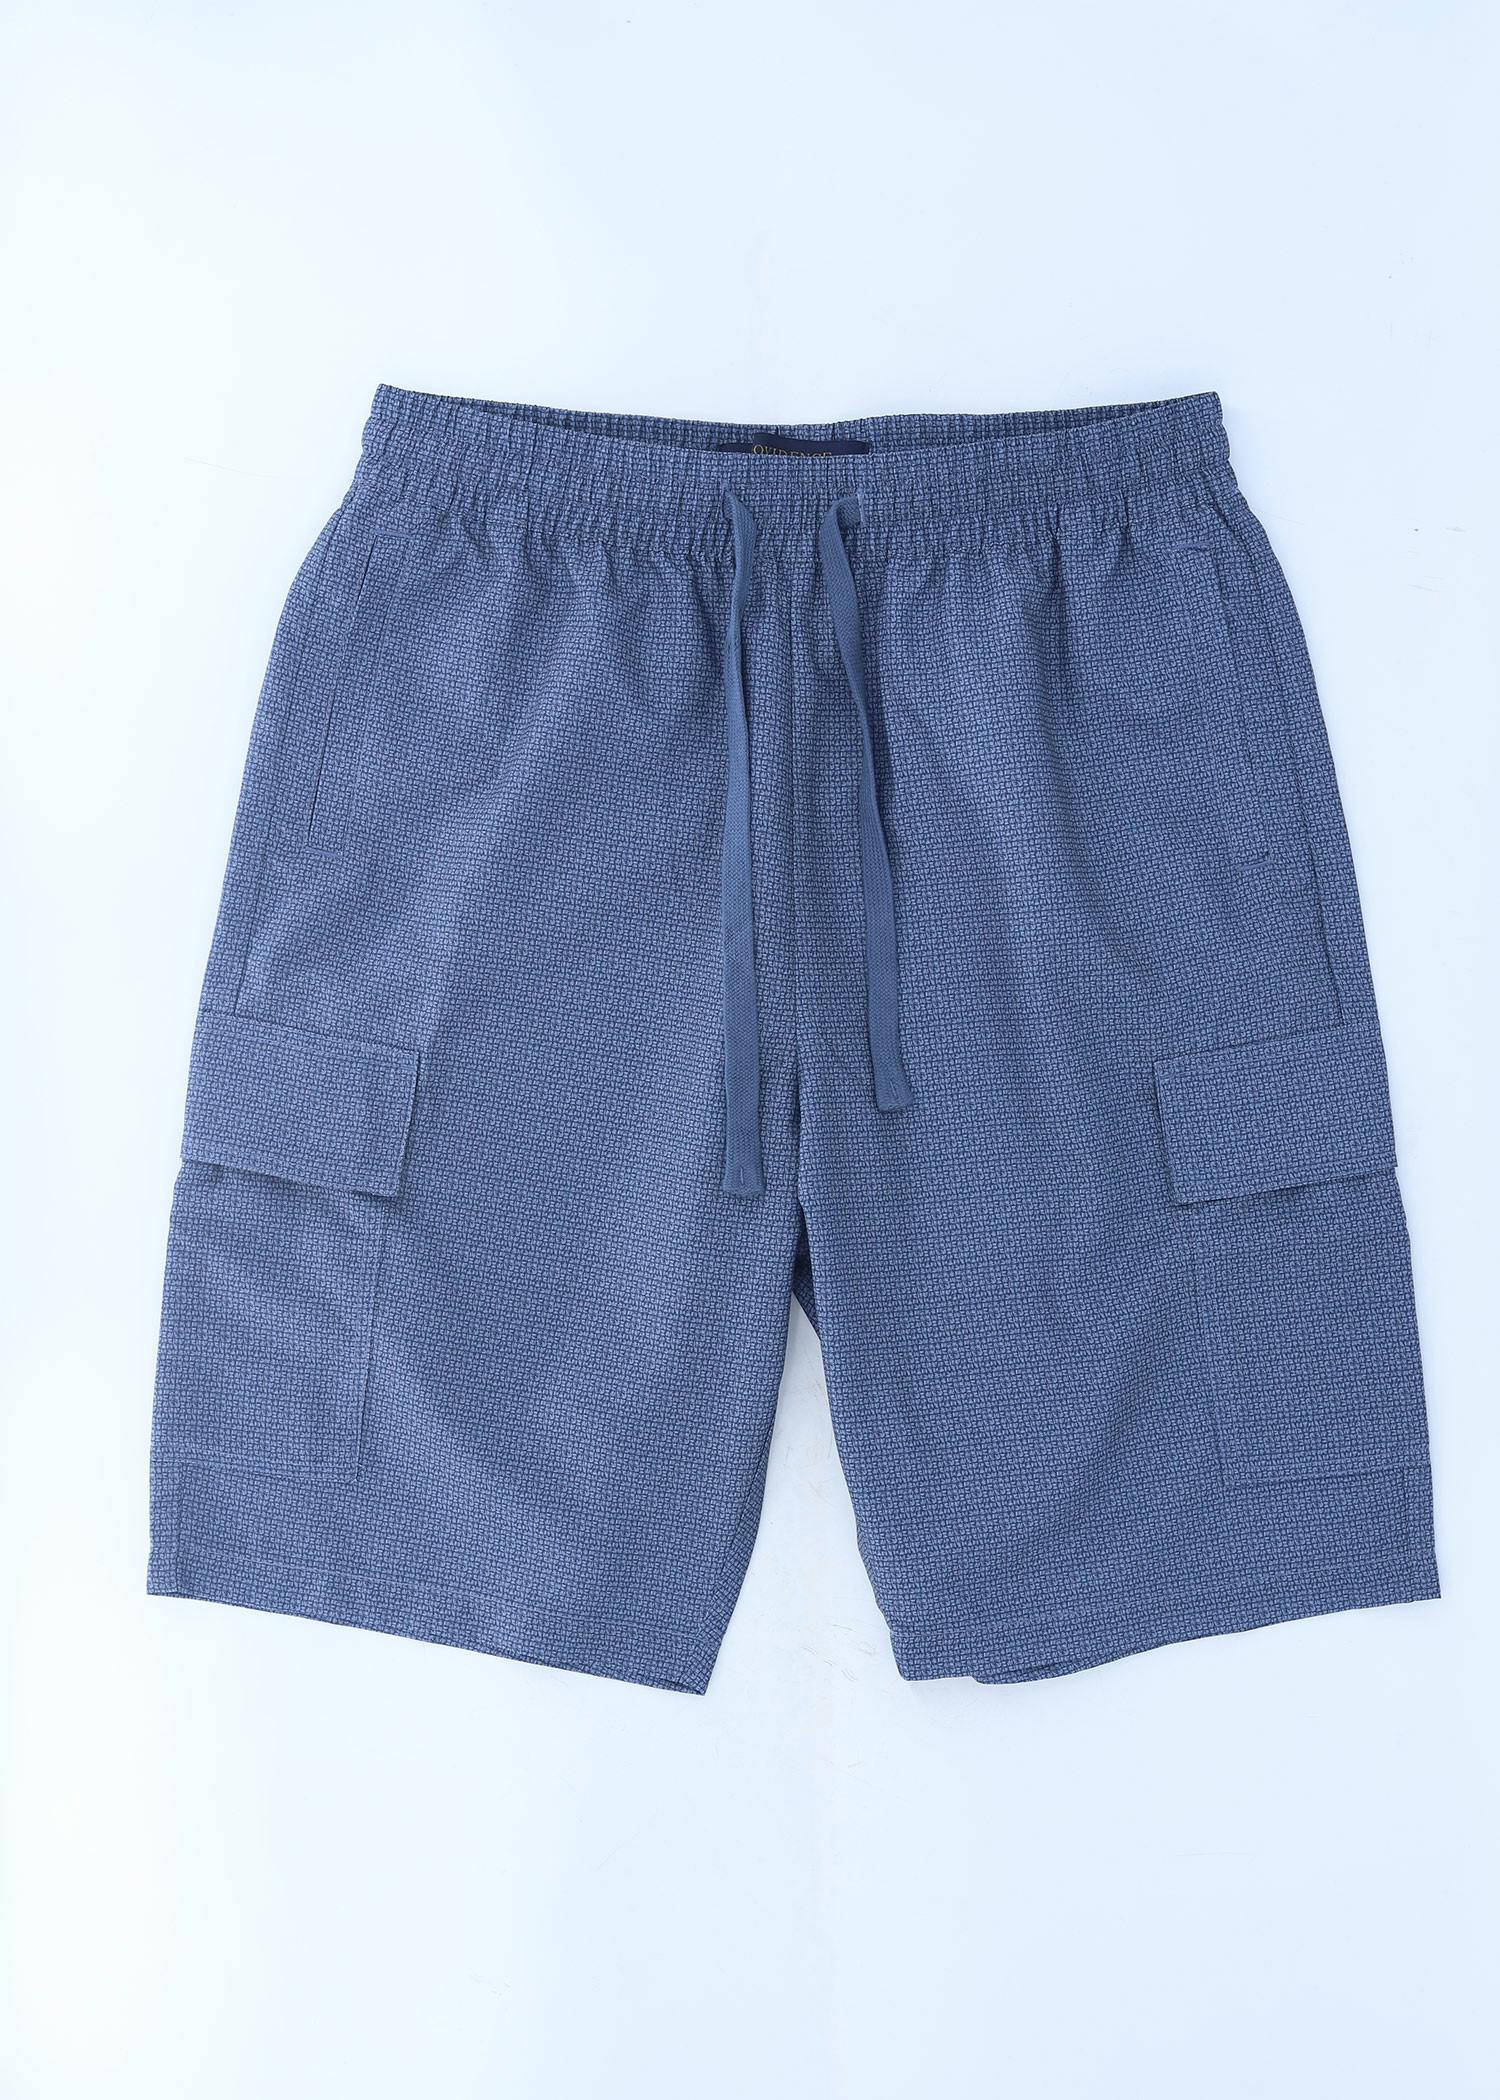 laridae iv short navy color front view